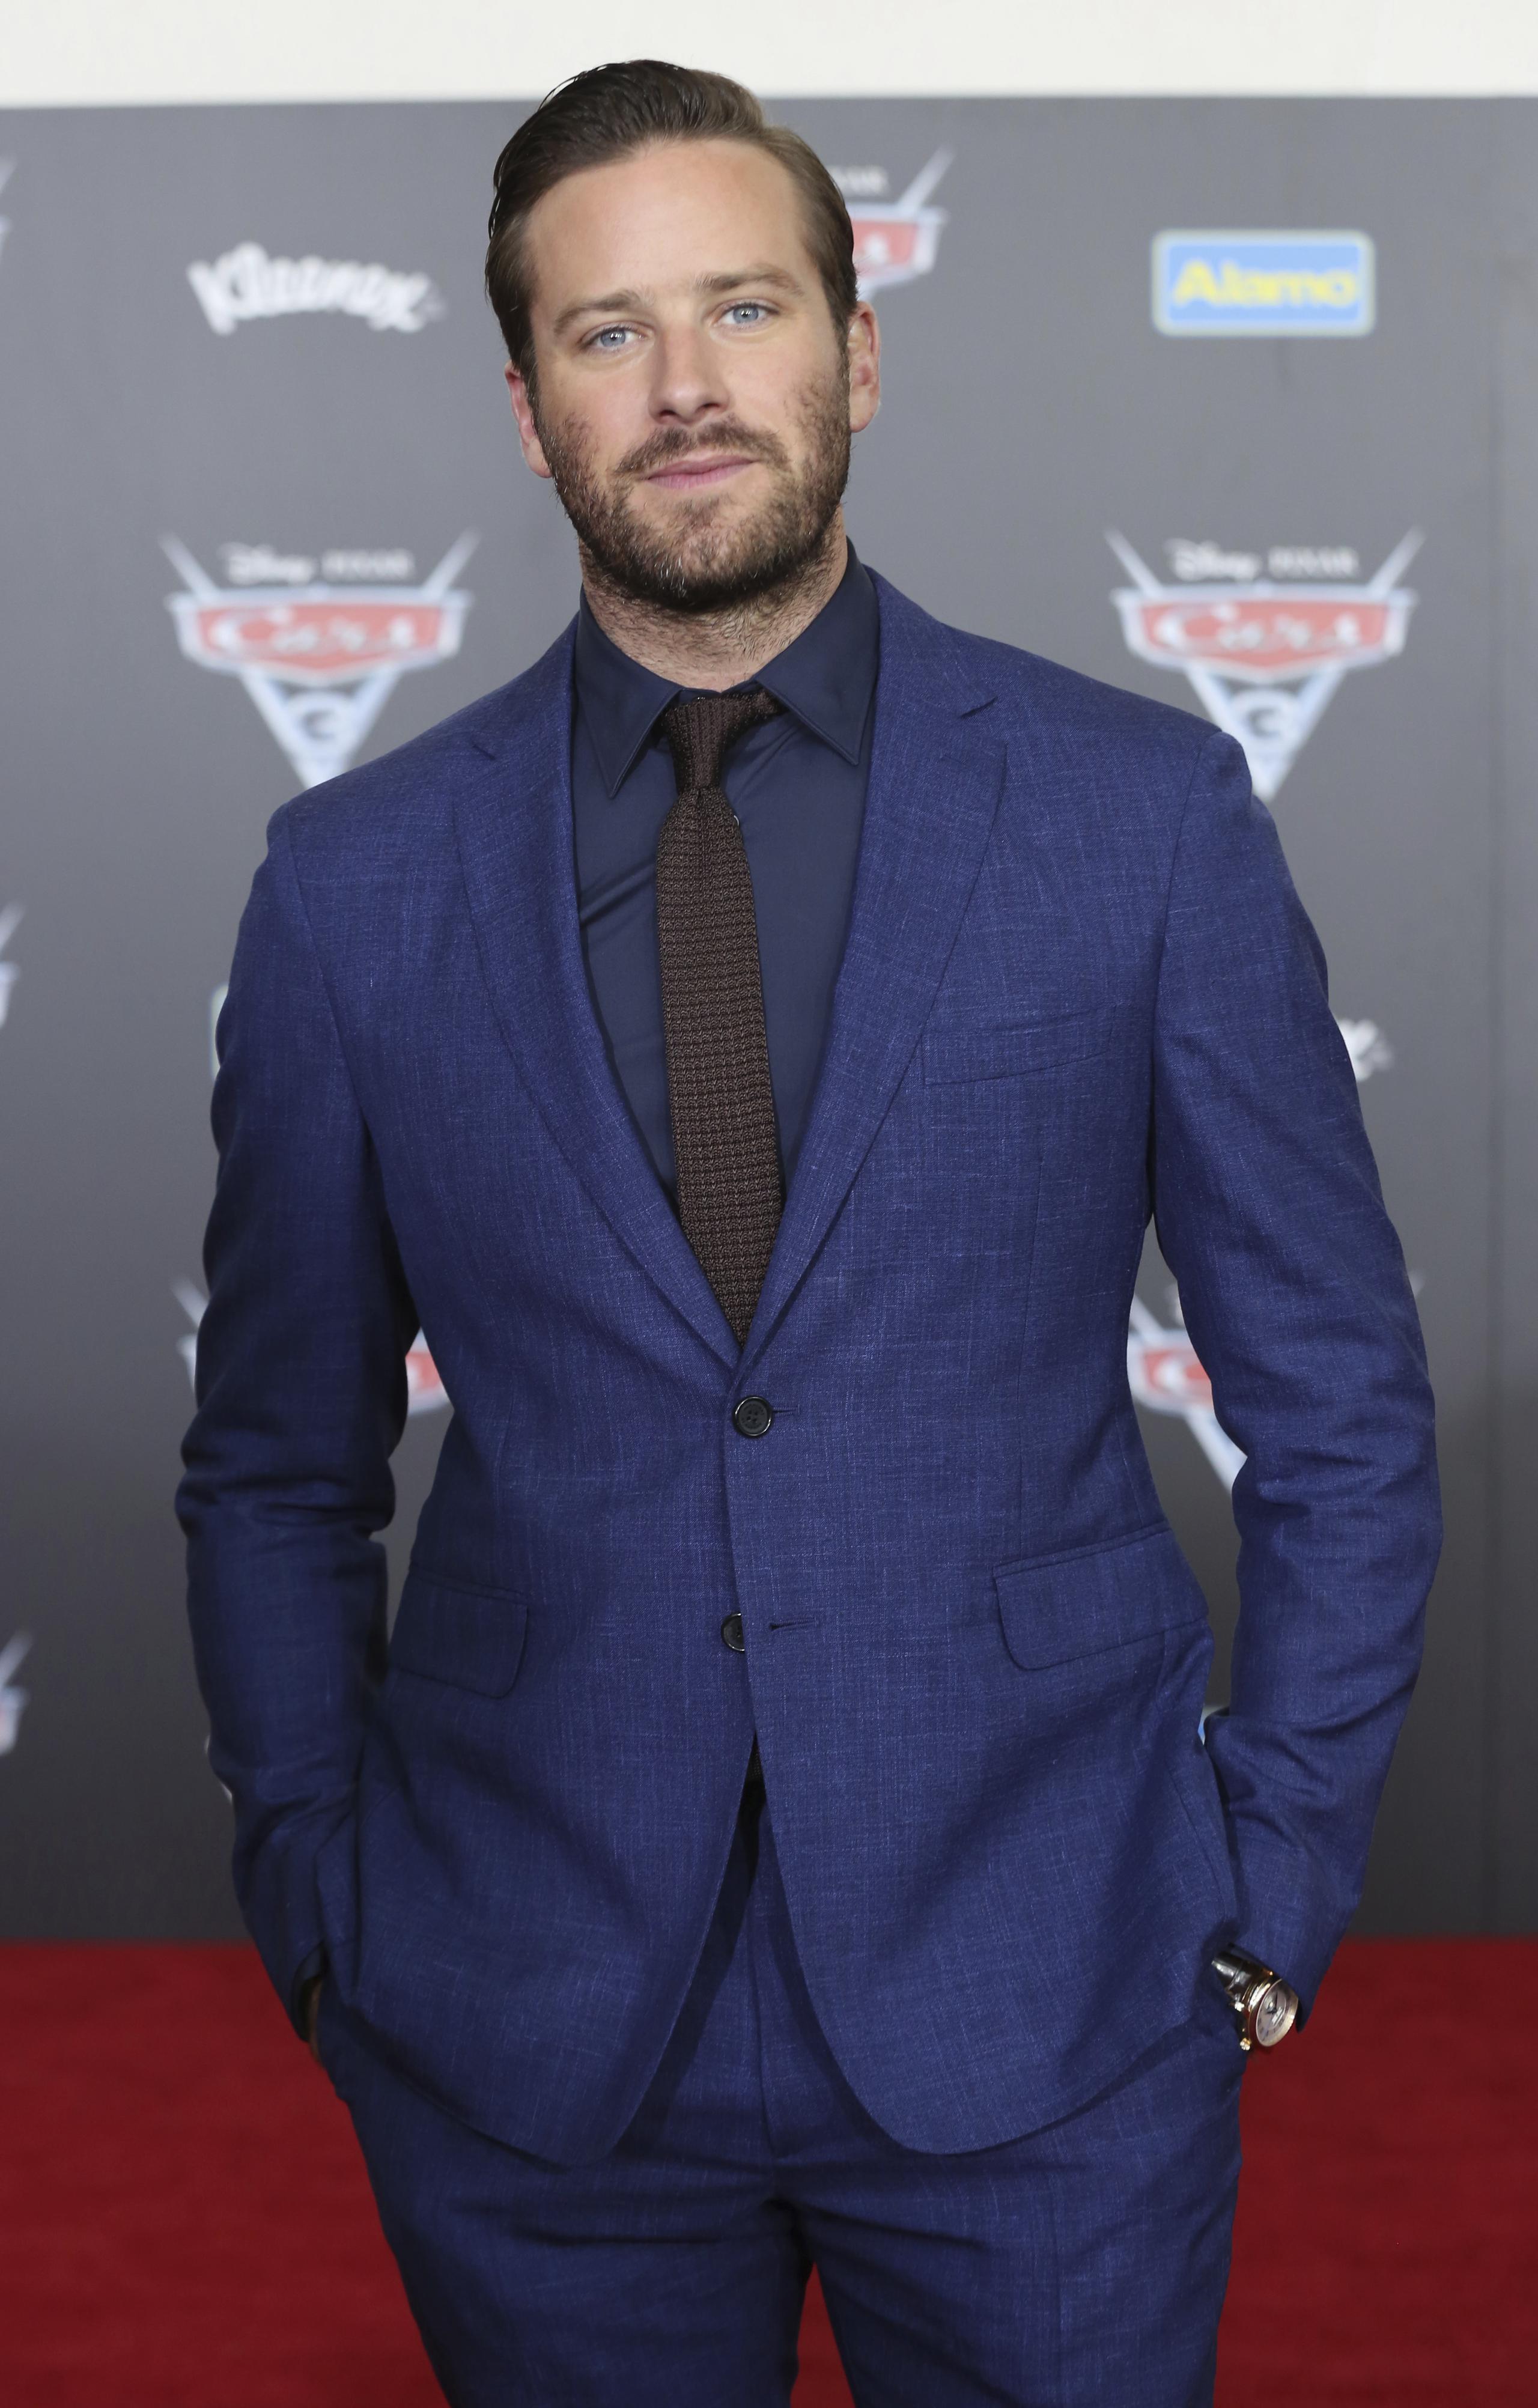 Armie Hammer arrives at the LA Premiere of "Cars 3" on Saturday, June 10, 2017, in Anaheim, Calif. (Photo by Willy Sanjuan/Invision/AP)